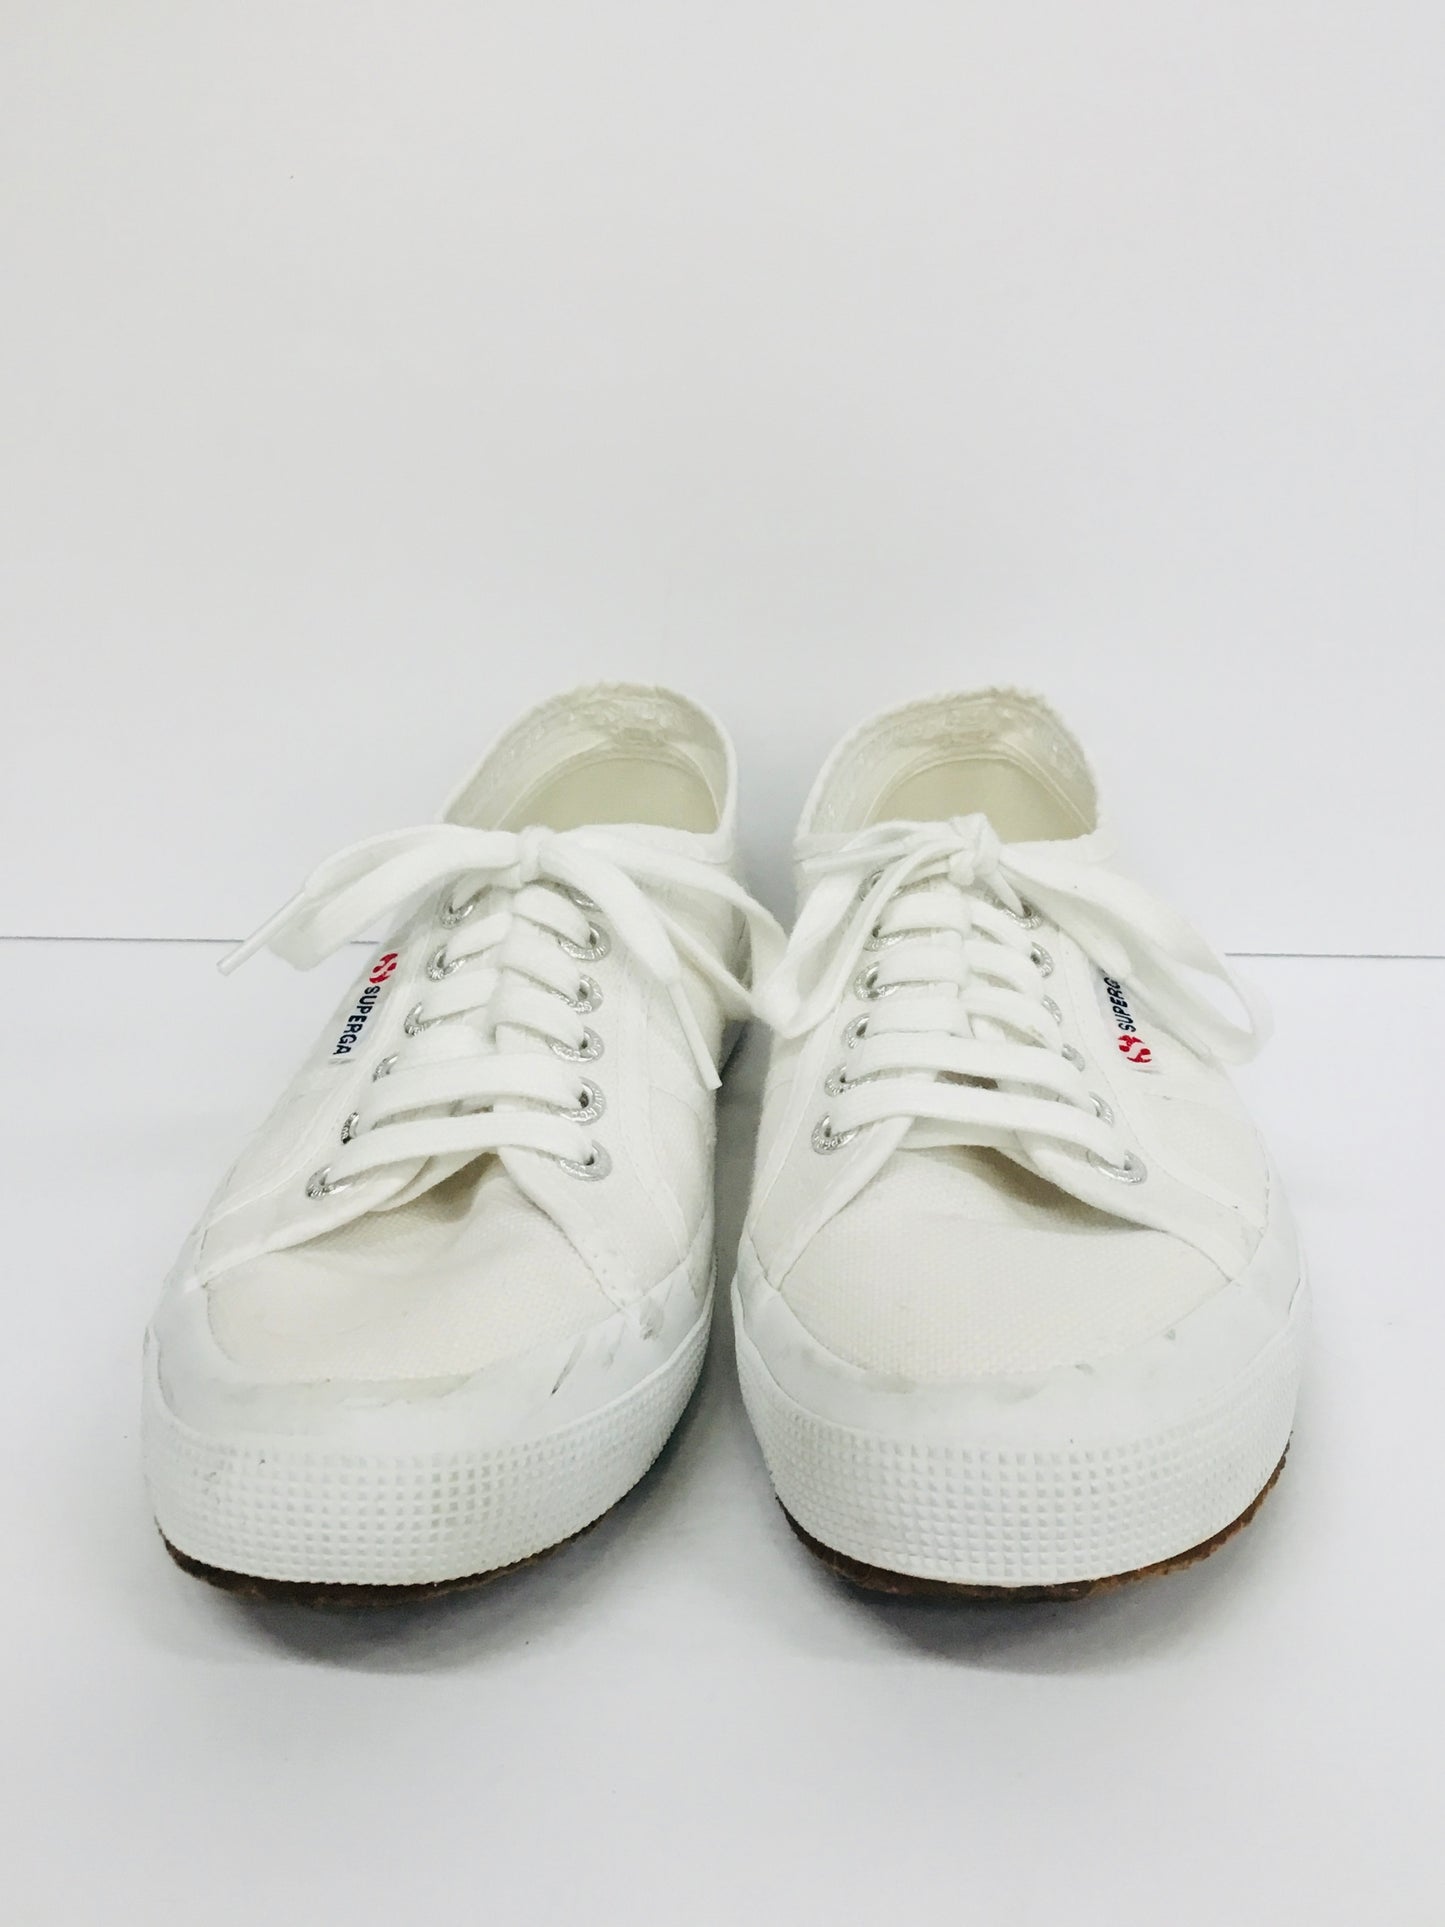 Shoes Athletic By Superga  Size: 9.5